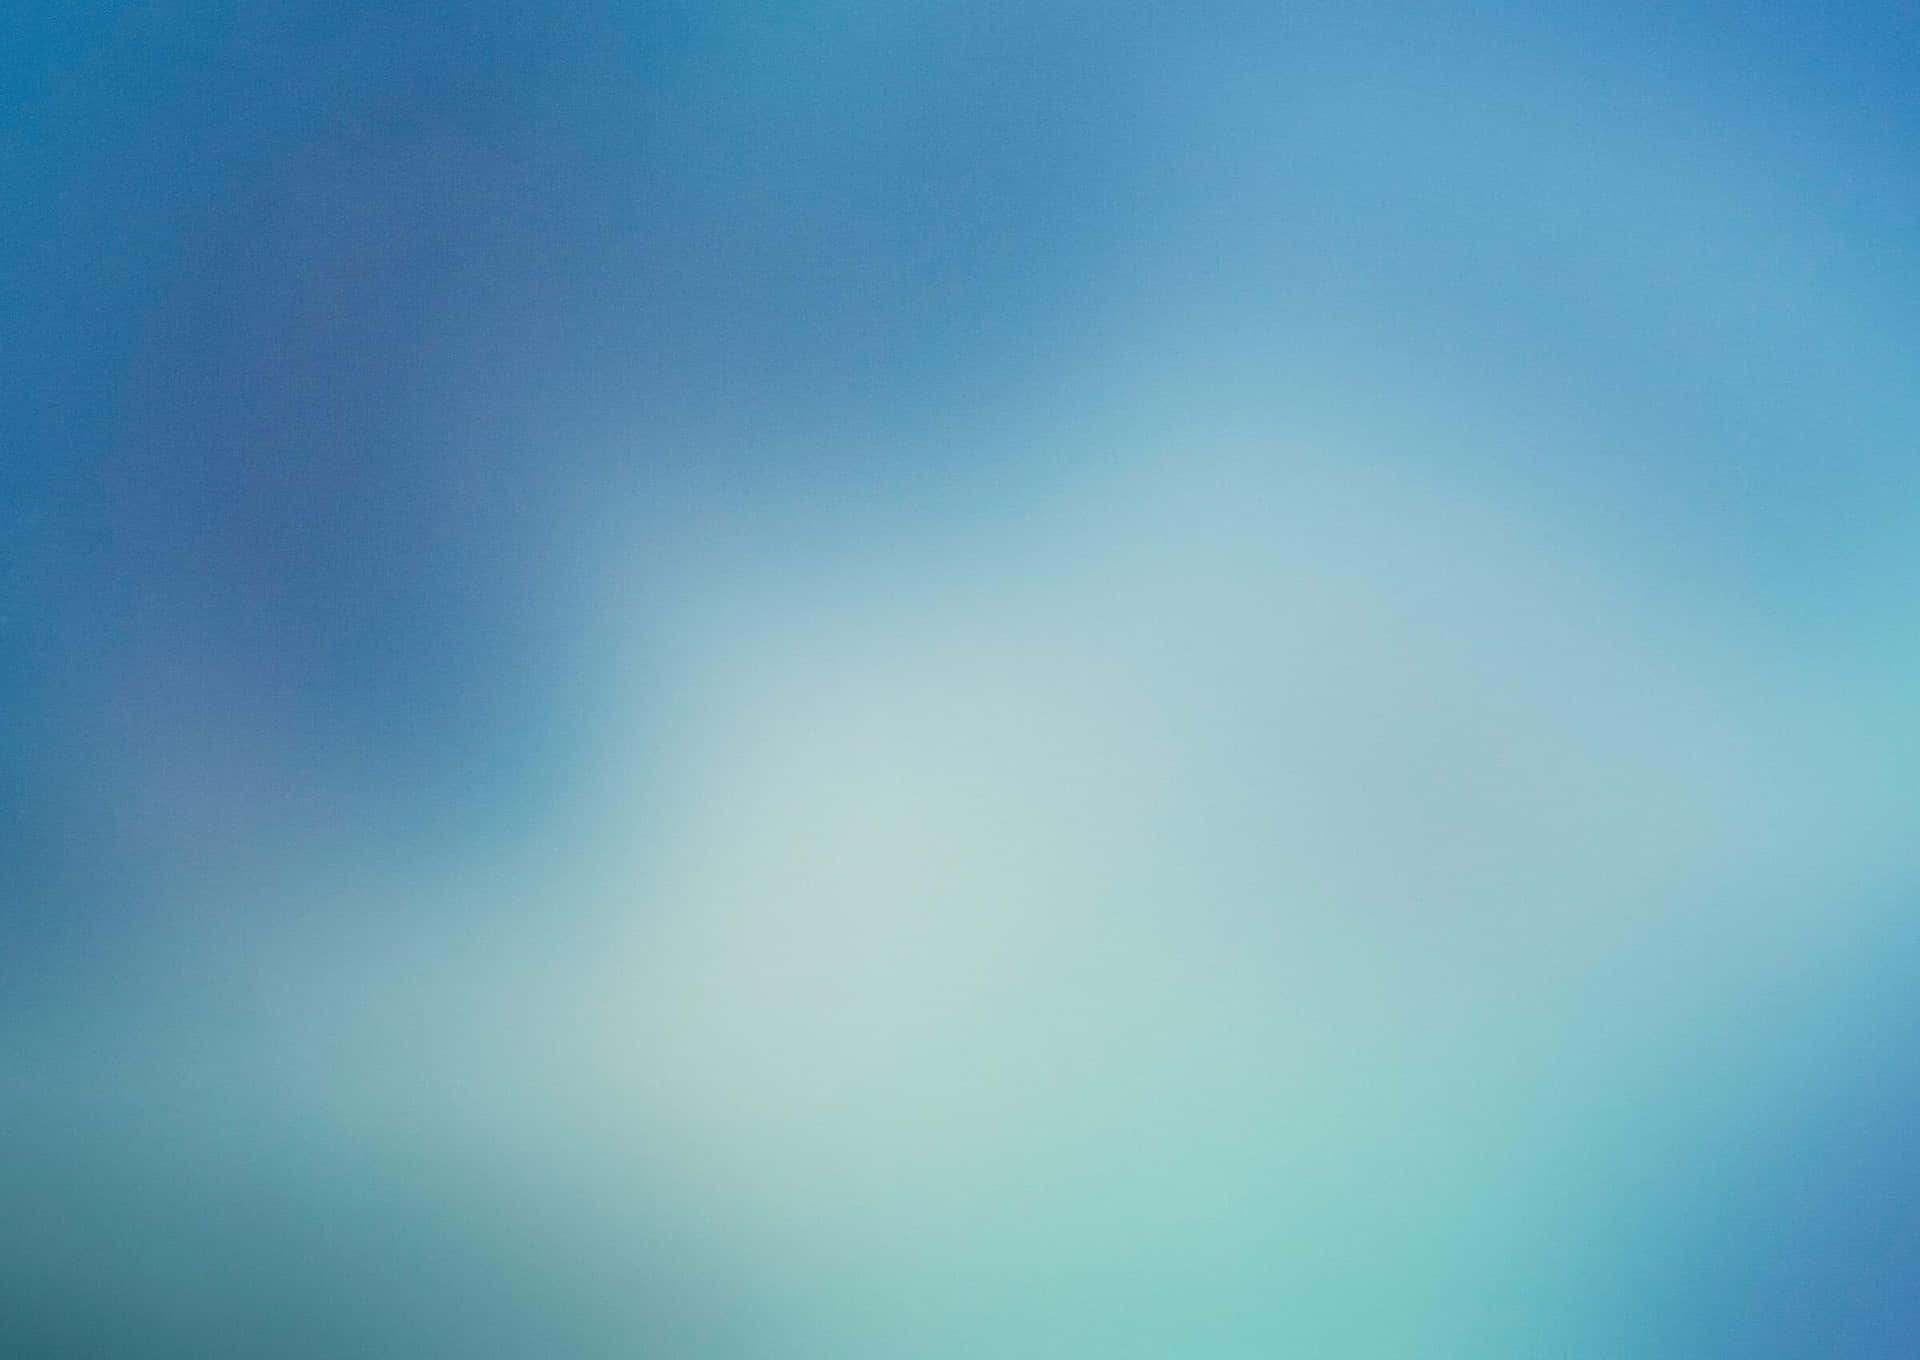 Abstract Blue Gradient Background Wallpaper